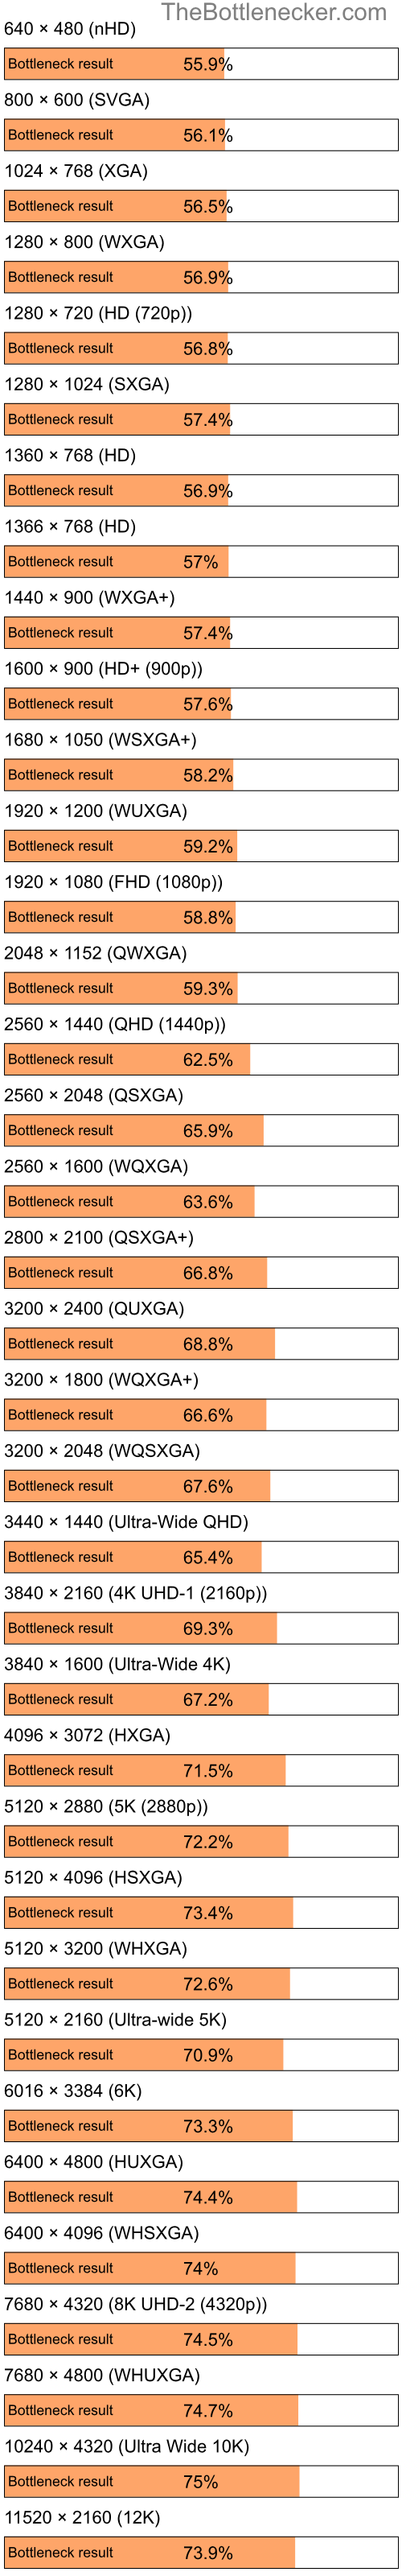 Bottleneck results by resolution for Intel Pentium 4 and AMD Radeon HD 6250 in Processor Intense Tasks